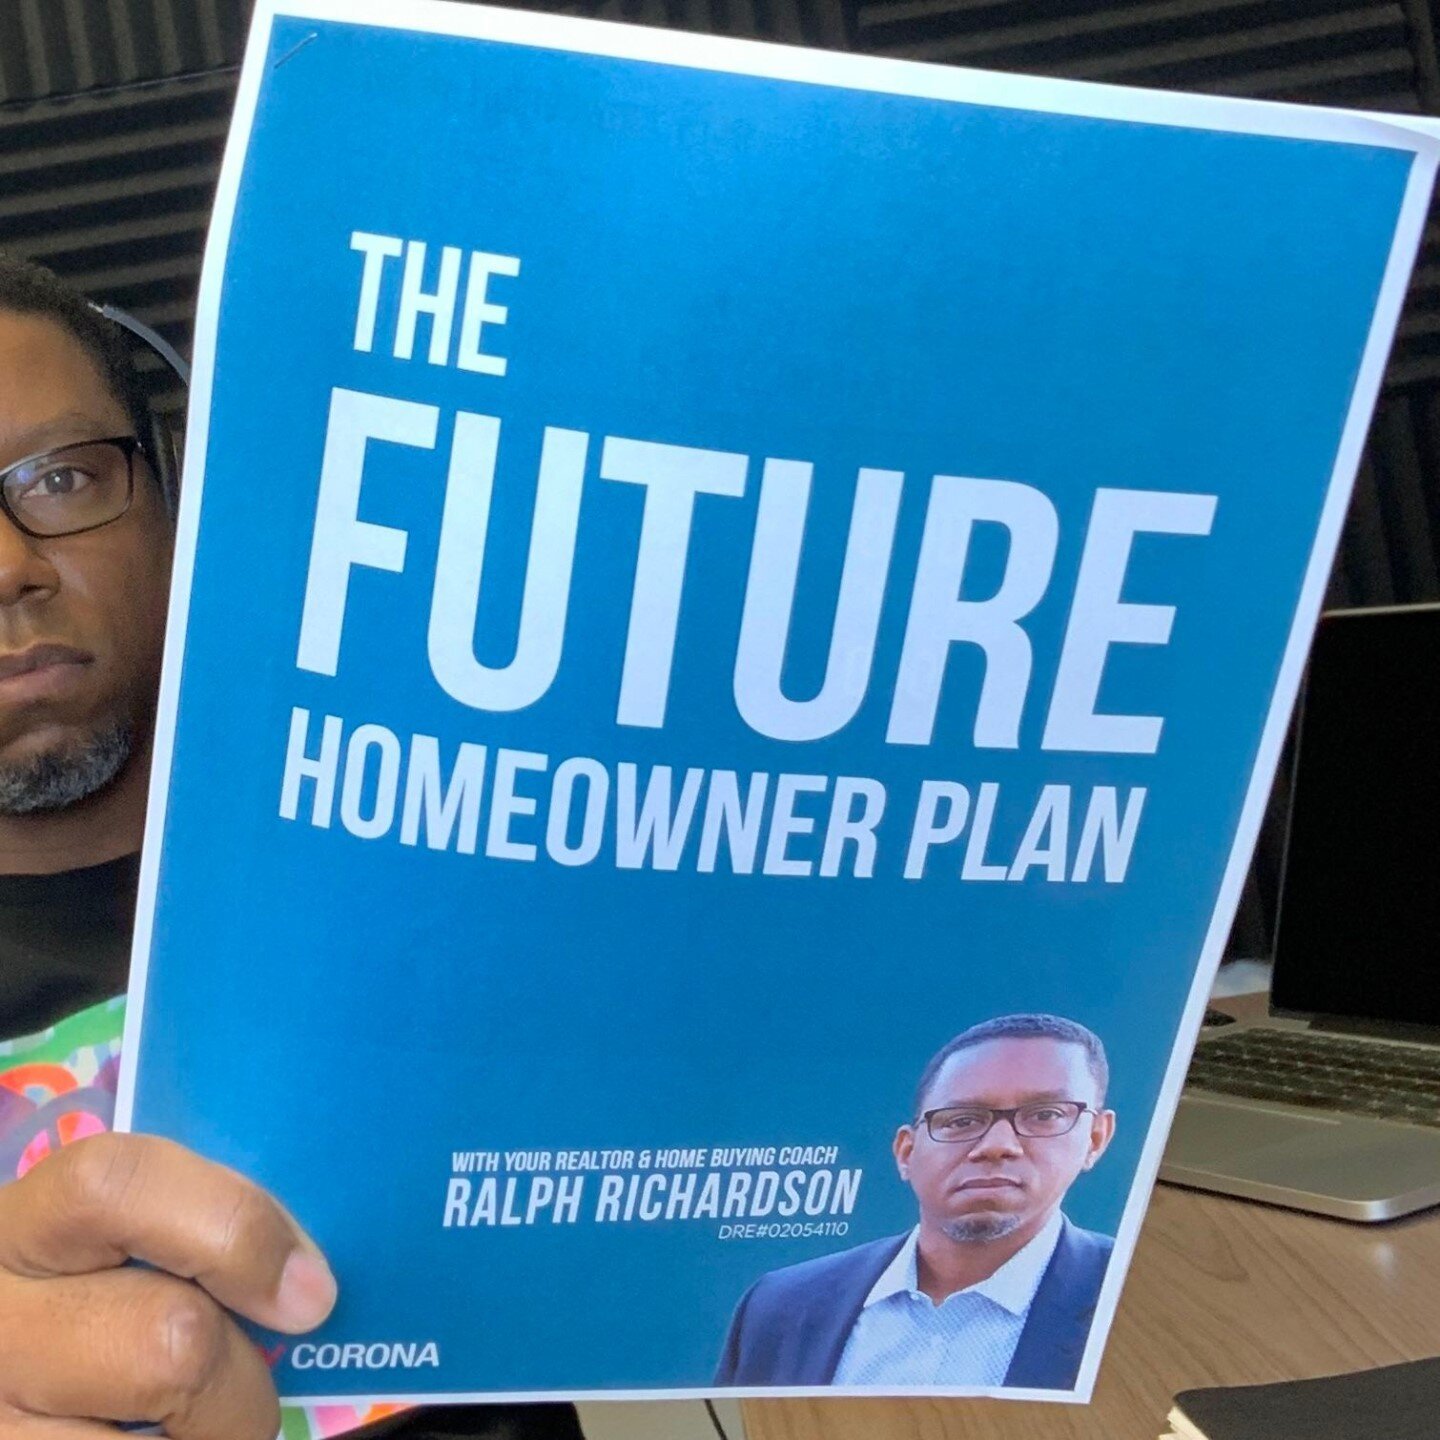 This week we made some upgrades to our Future Homeowner Plan.  Excited about these changes and to share them with you! ⁣
⁣
DM me to get your Future Homeowner Plan next week!⁣
⁣
- RALPH